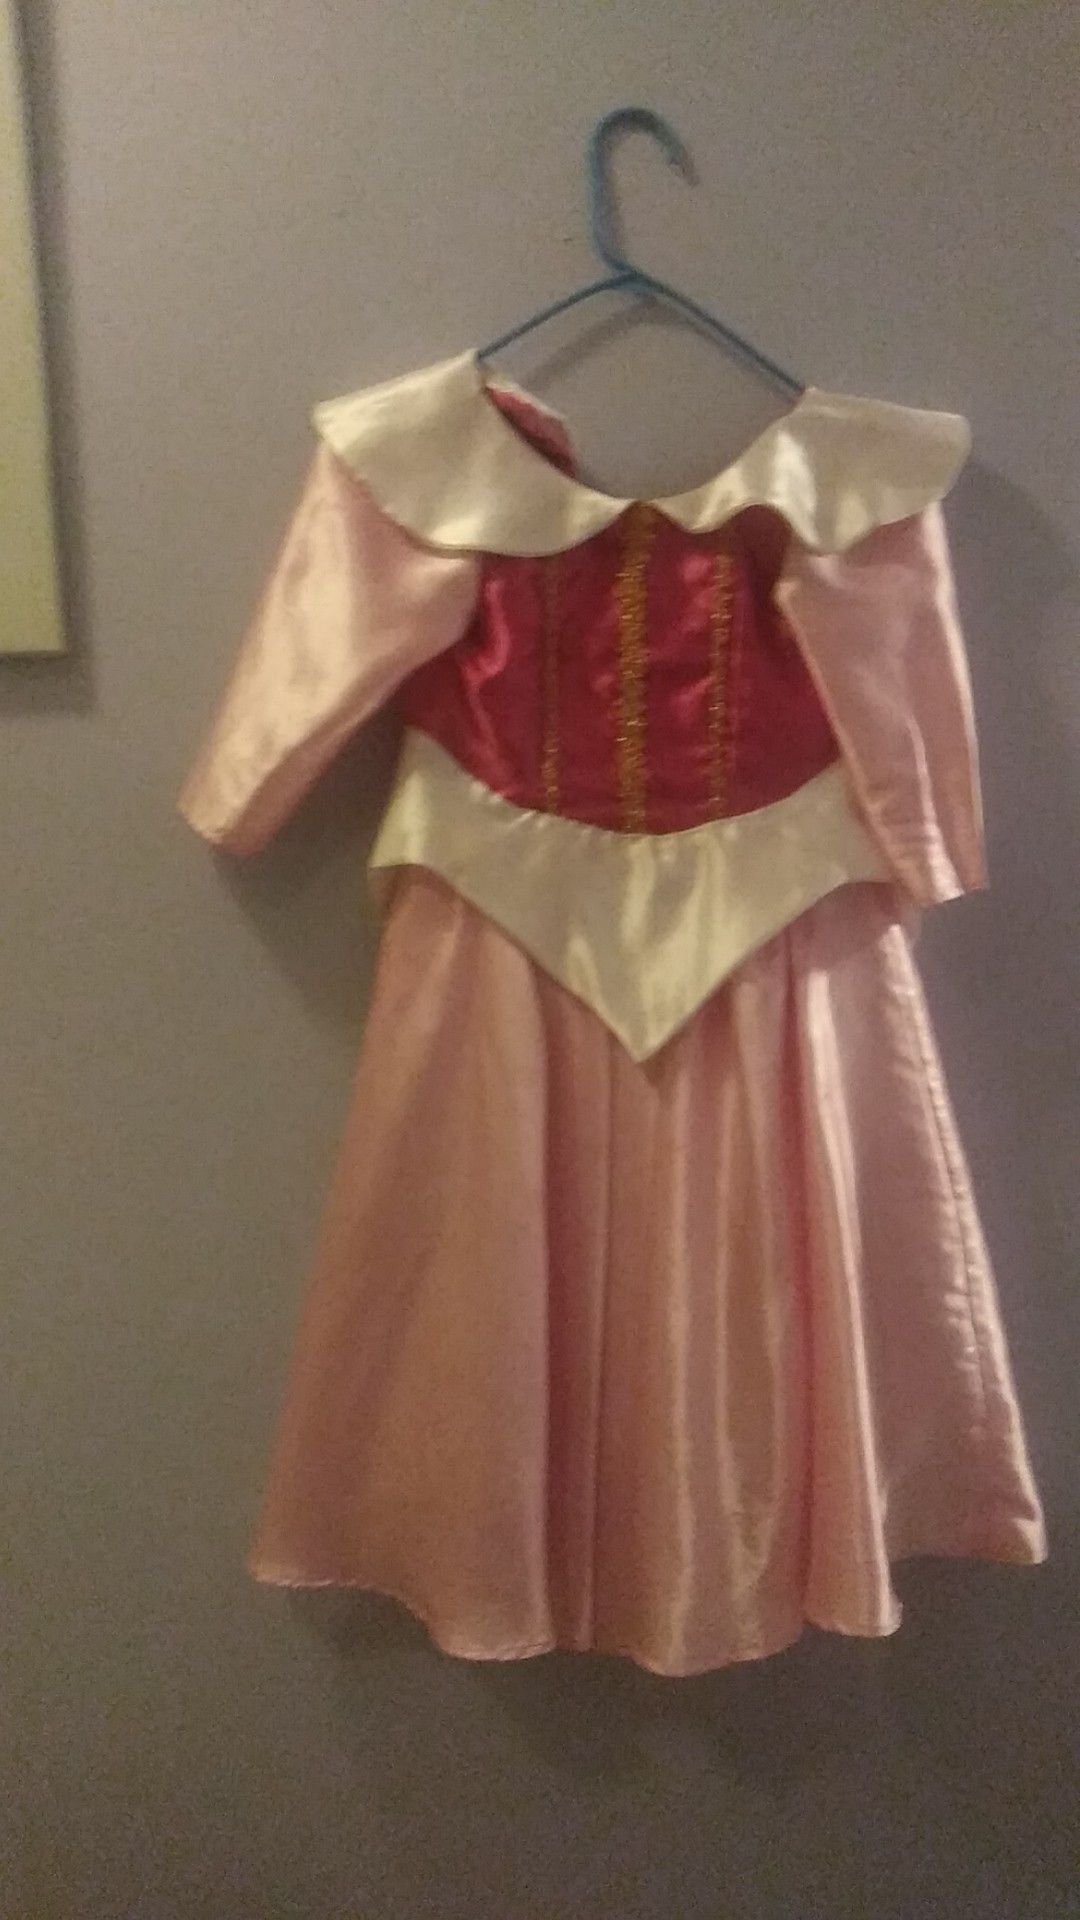 Princess Aurora costume for 6-7 years old